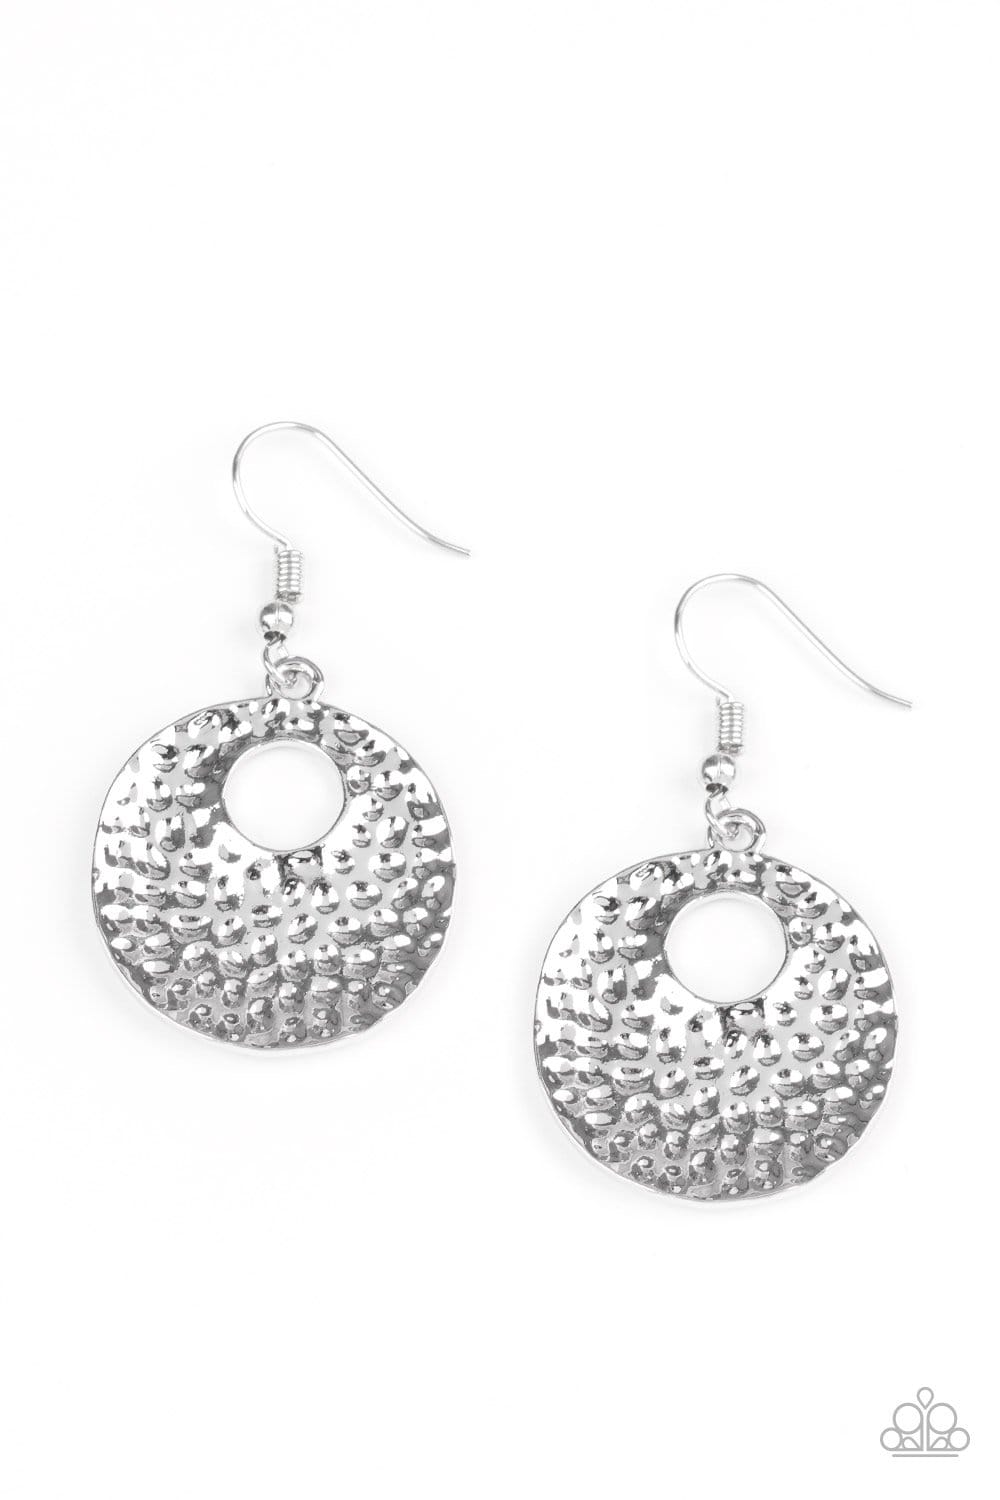 D97 - A Taste for Texture Silver Earrings by Paparazzi Accessories on Fancy5Fashion.com